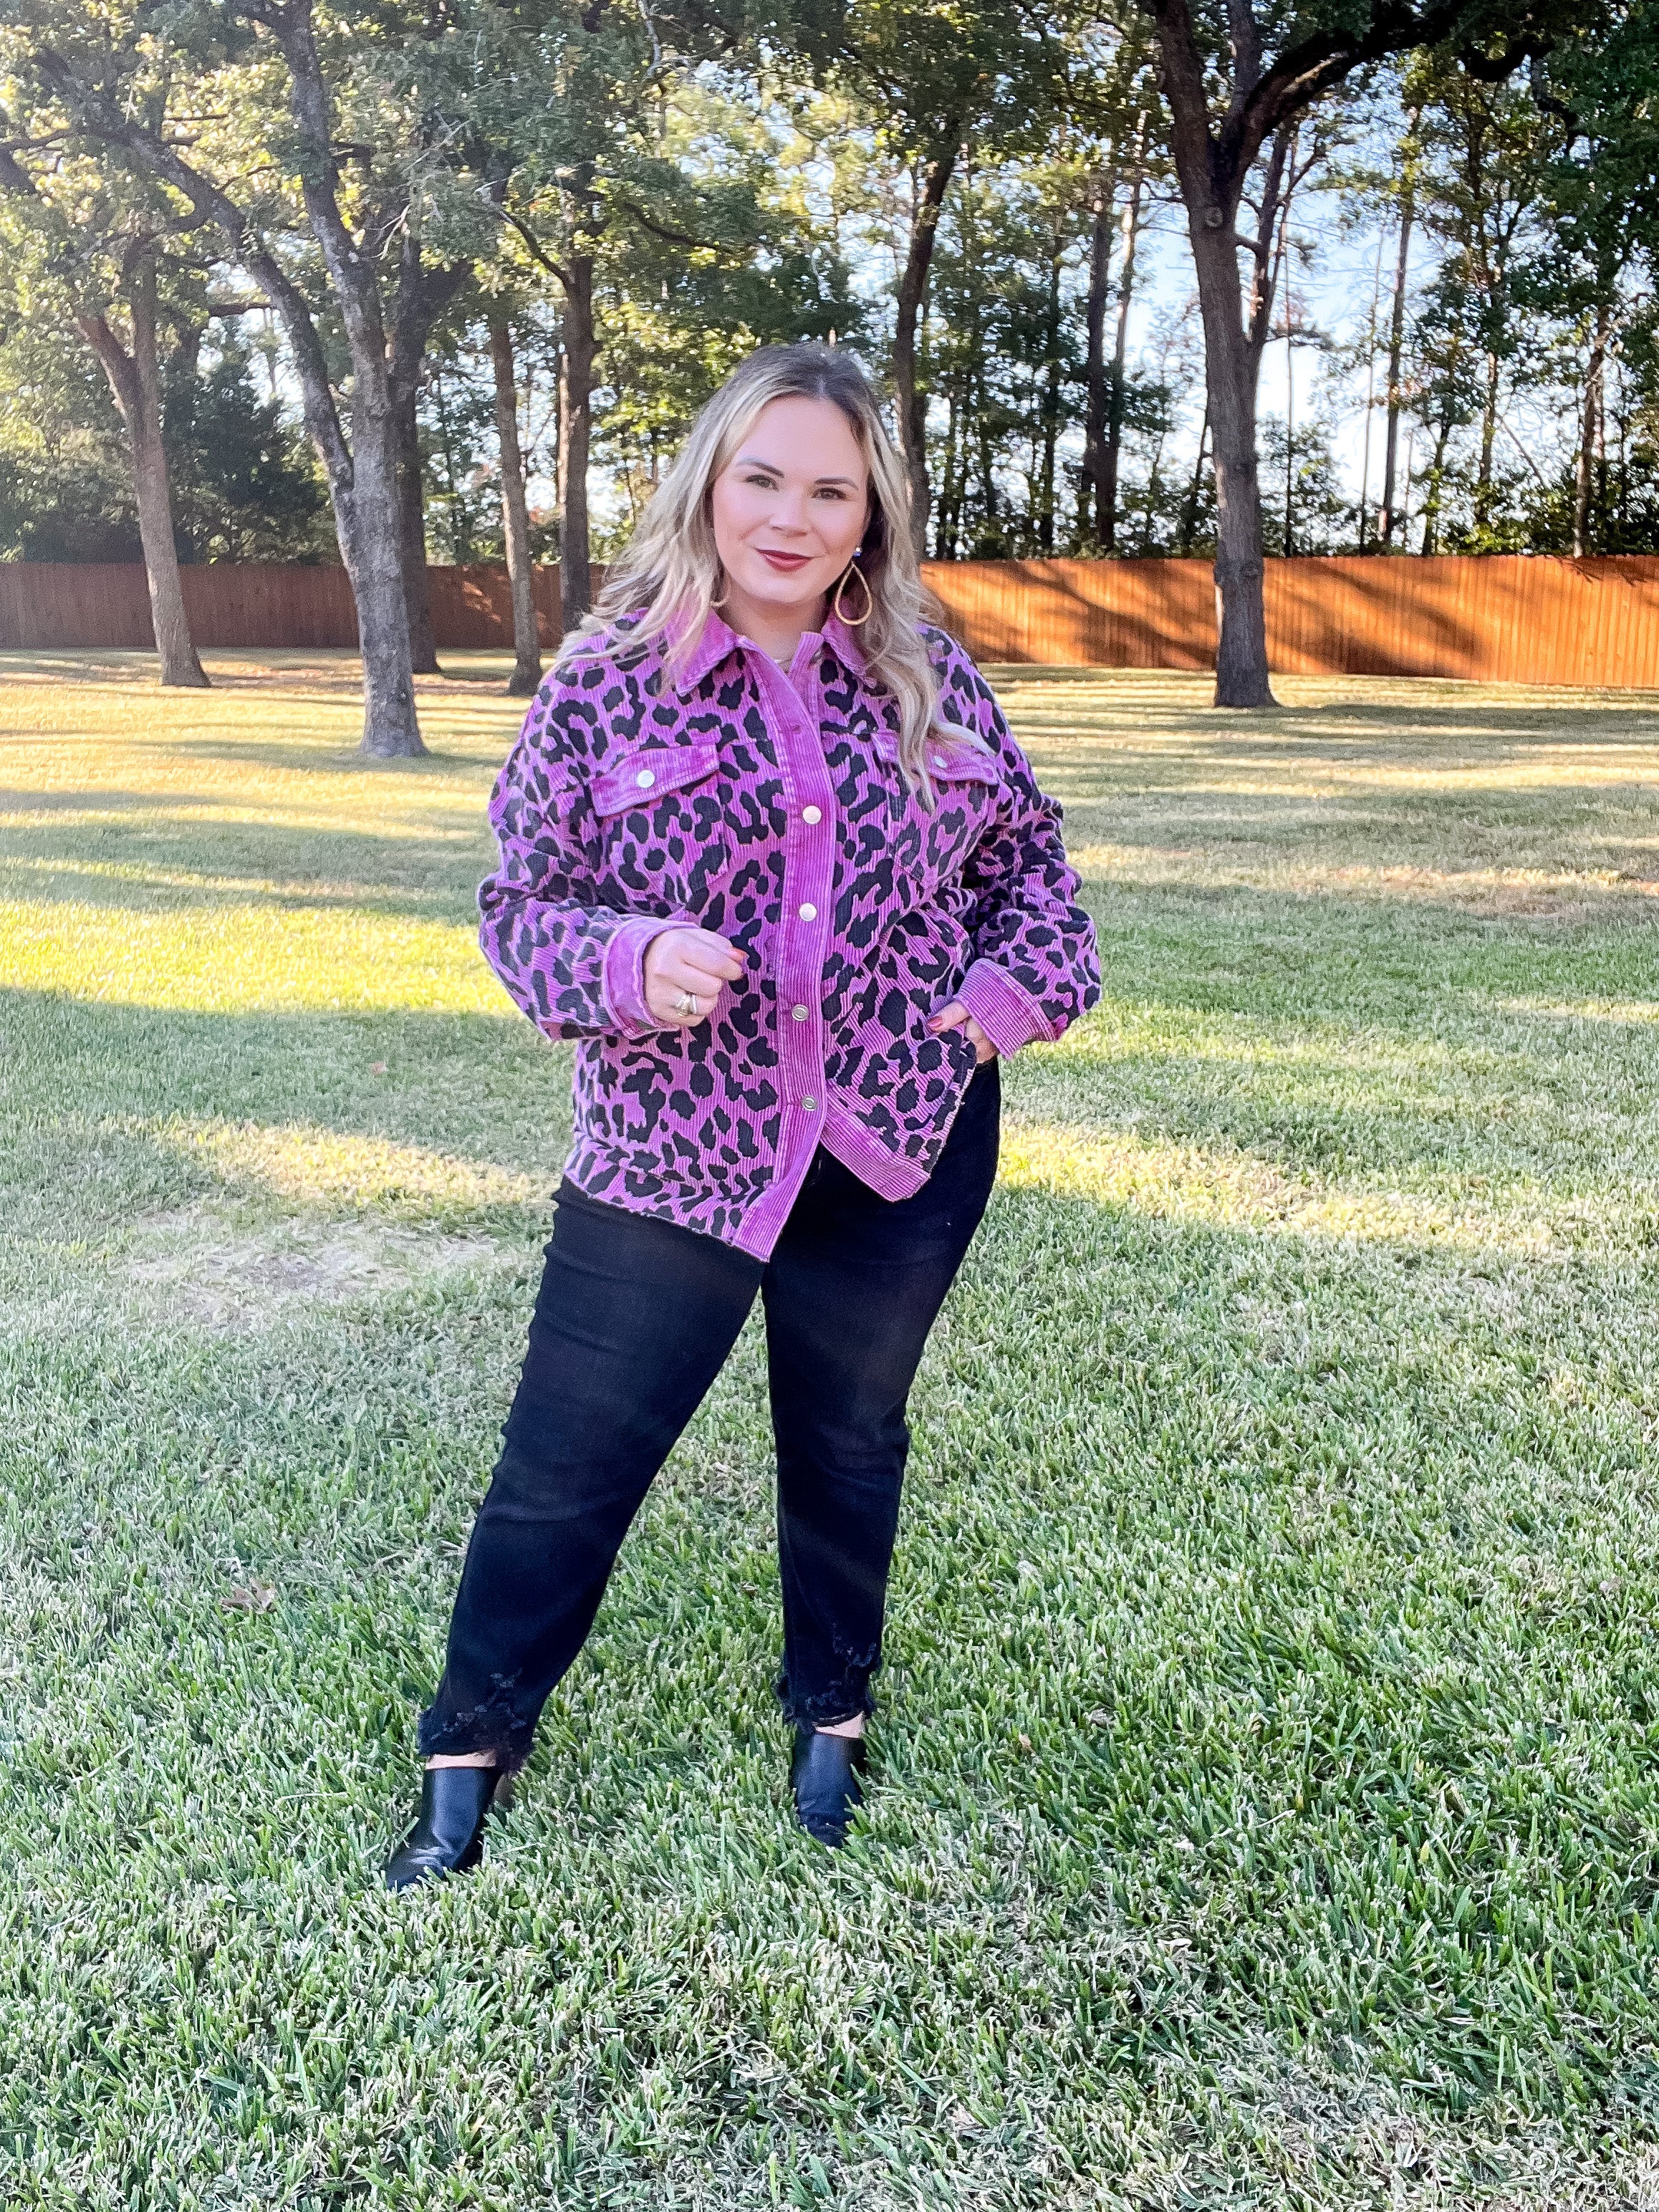 Quick To Cuddle Leopard Print Corduroy Jacket in Purple - Giddy Up Glamour Boutique